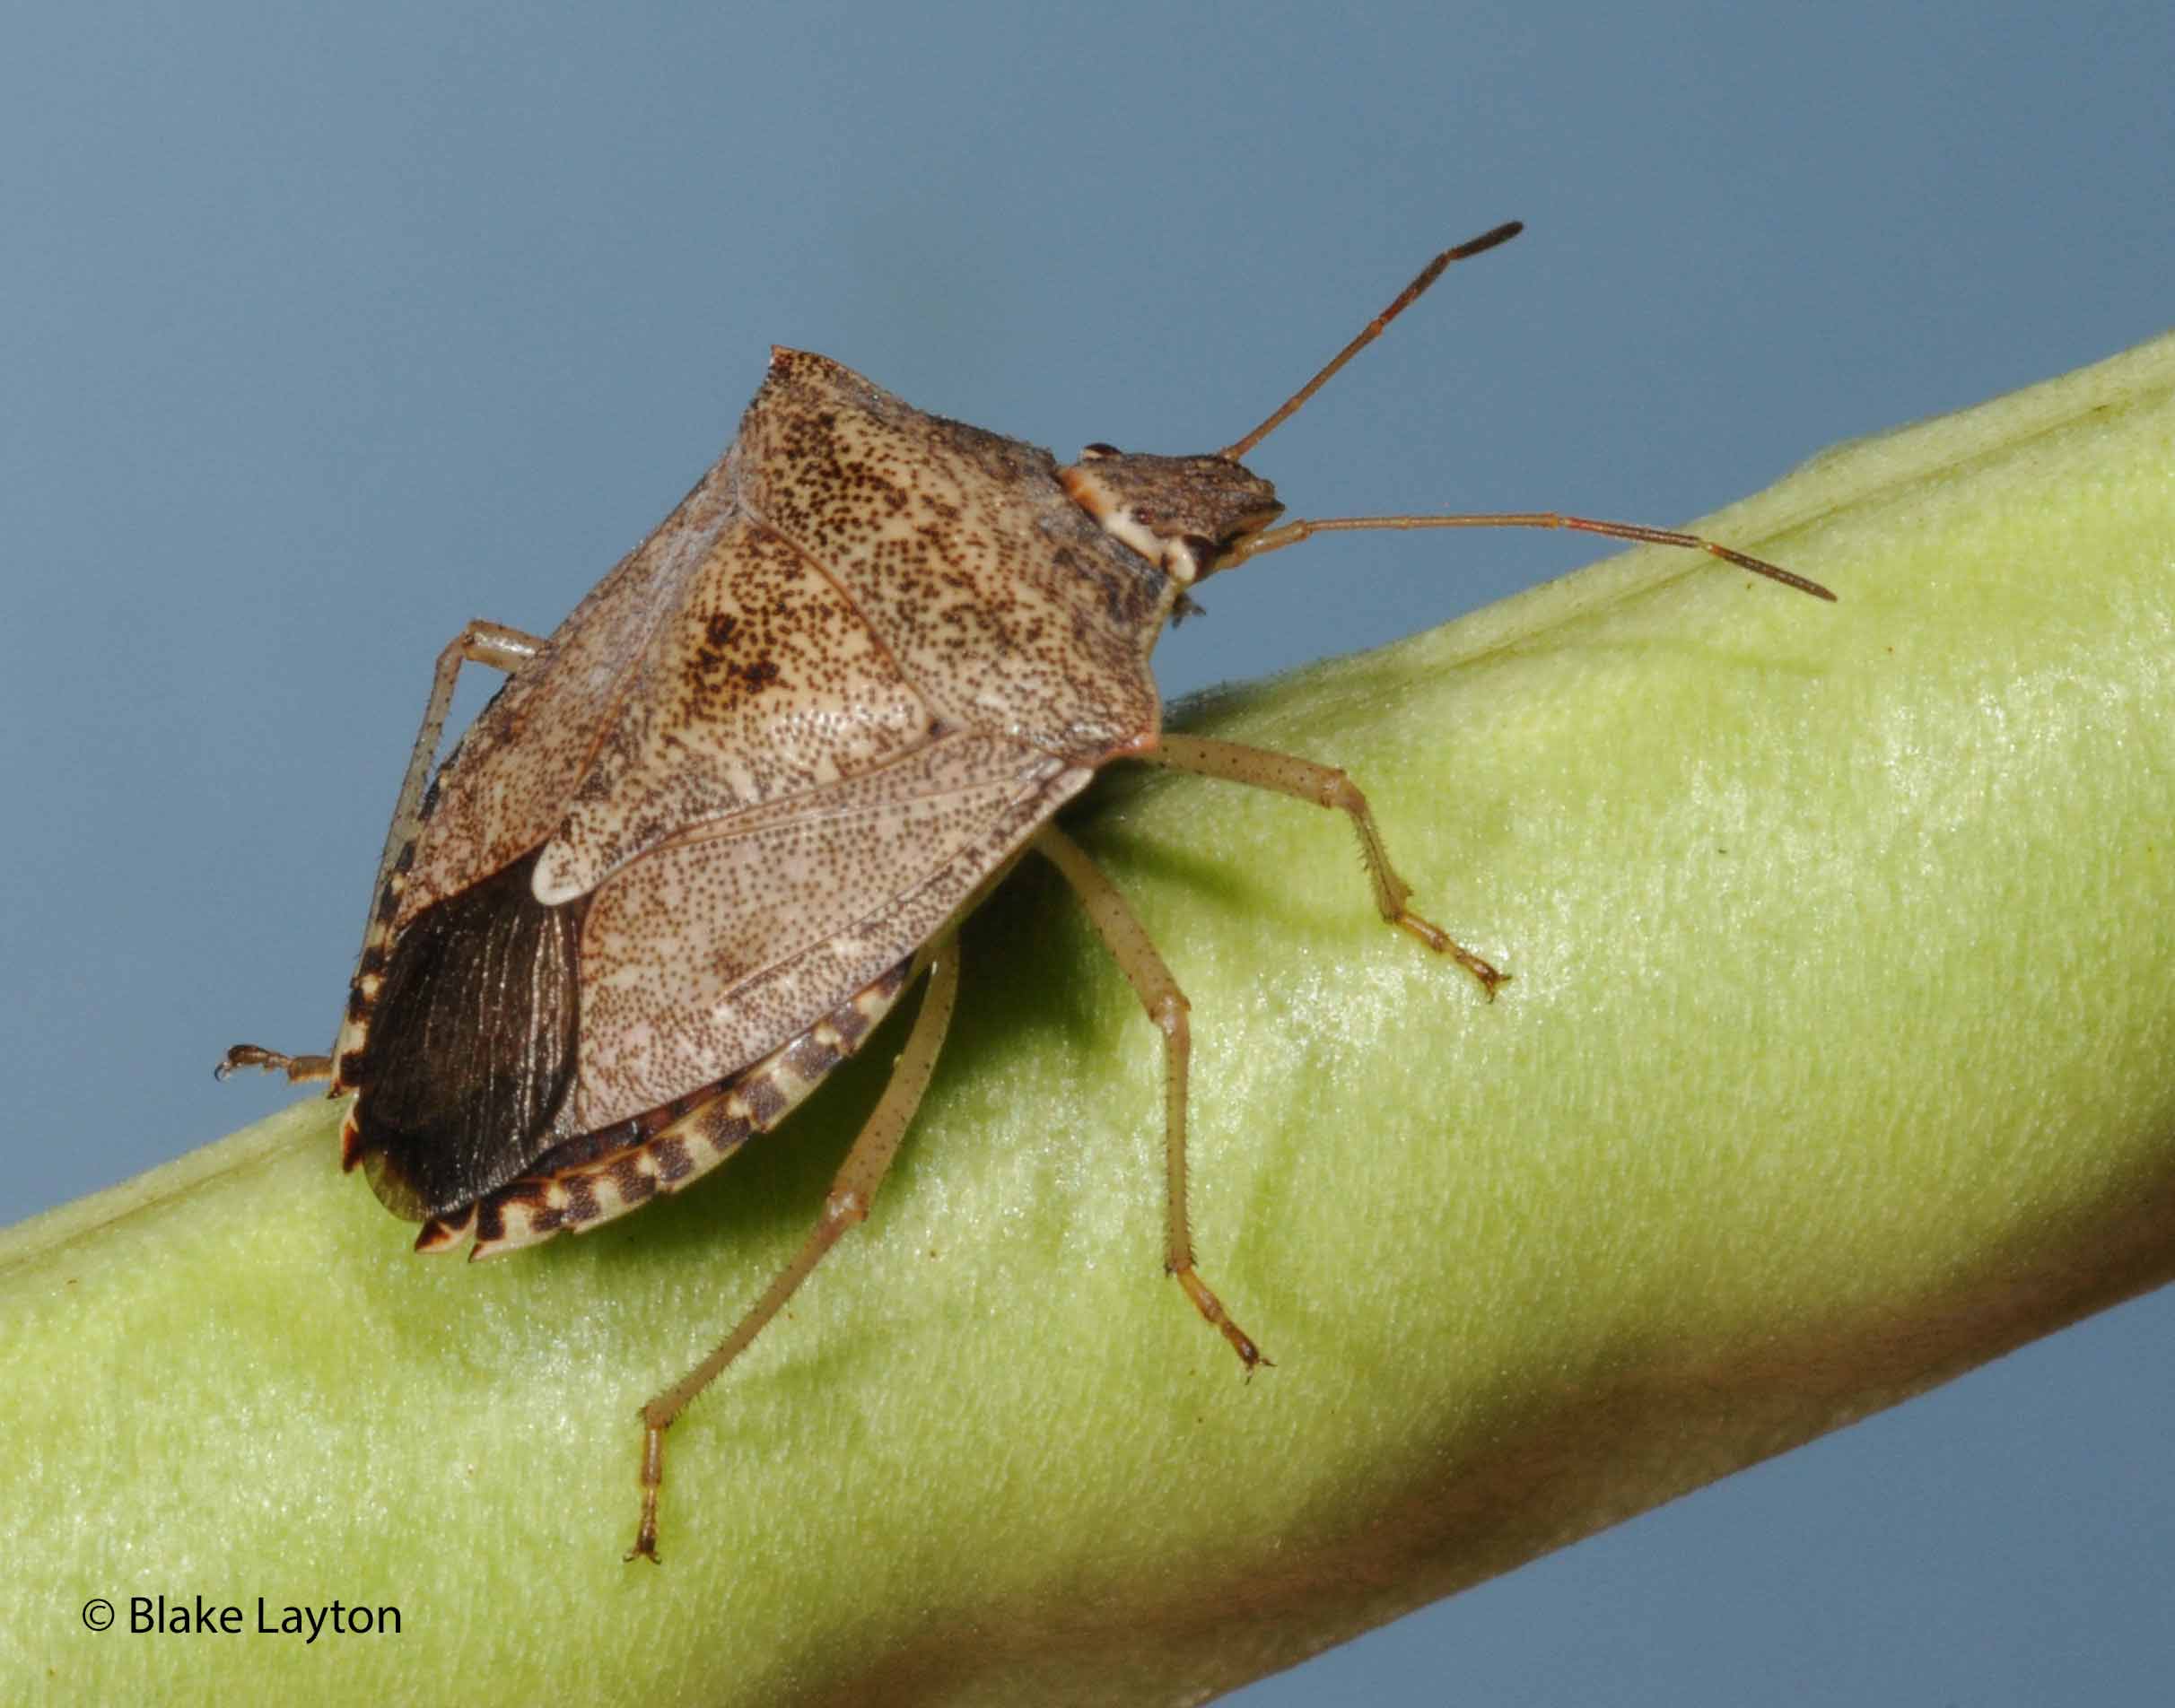 A brown insect on a green stem.